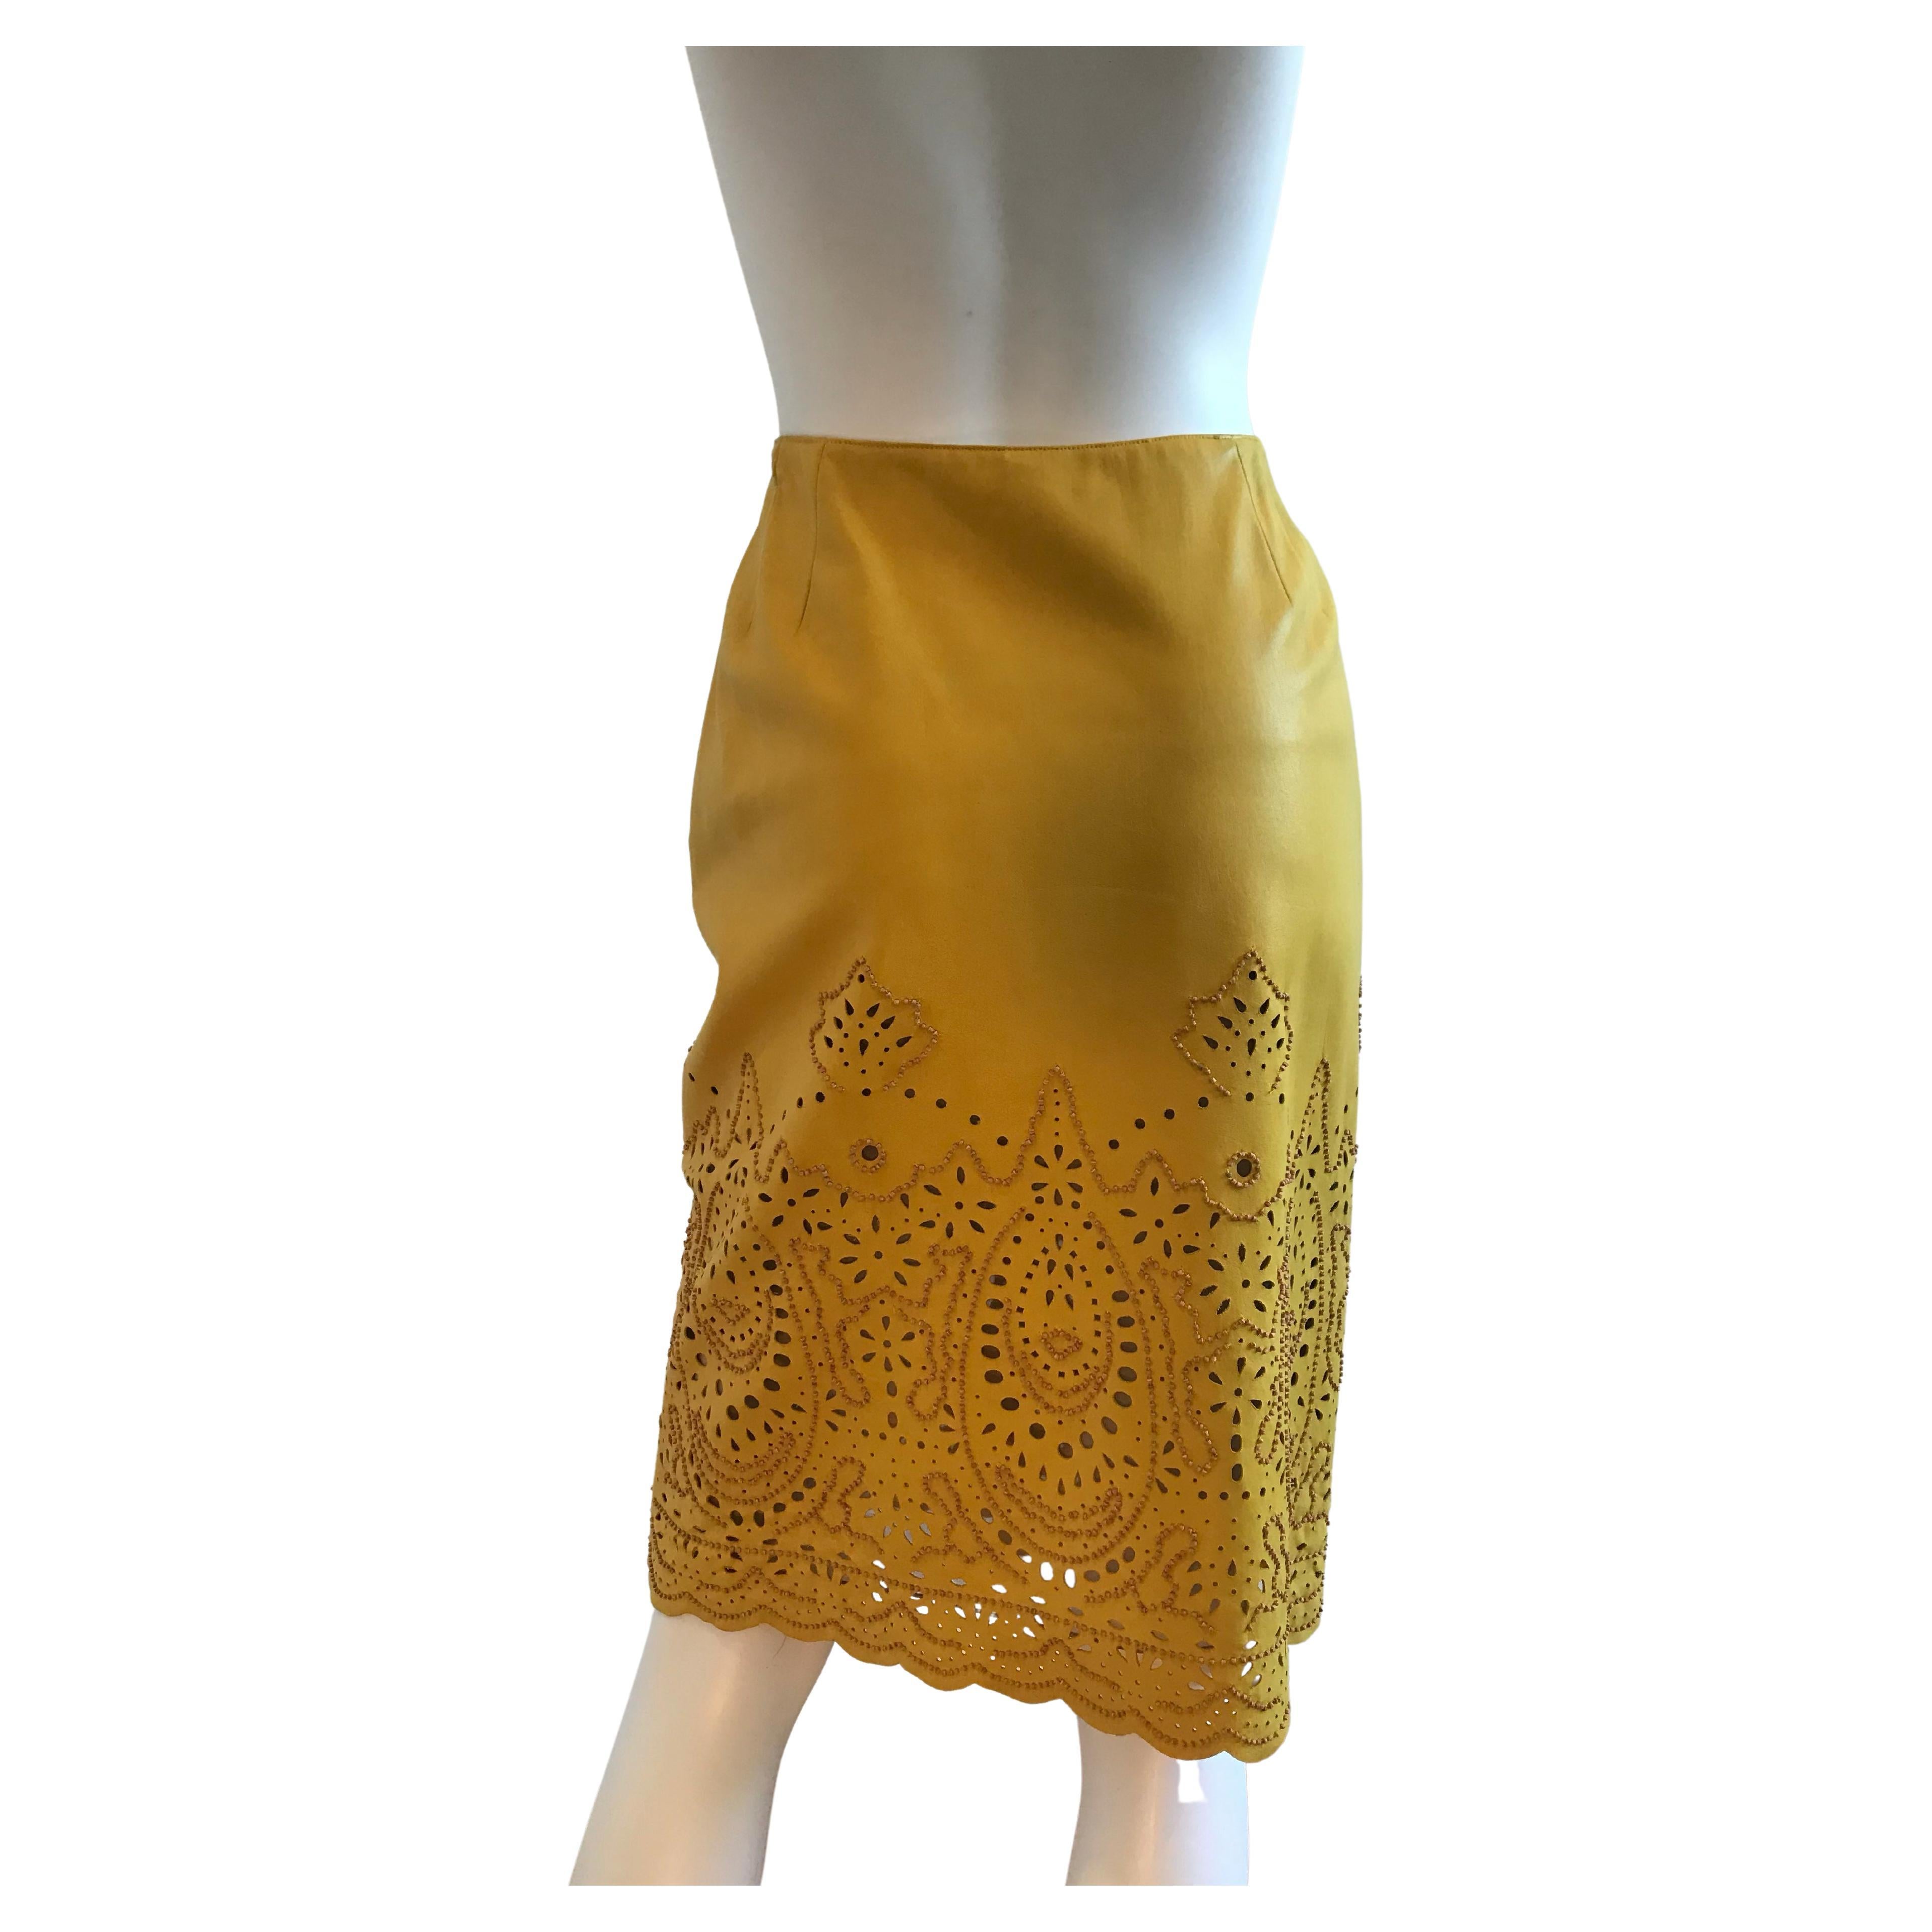 Oscar De La Renta for Saks Fifth Avenue Yellow Leather Cutout Beaded Skirt In Good Condition For Sale In Brooklyn, NY